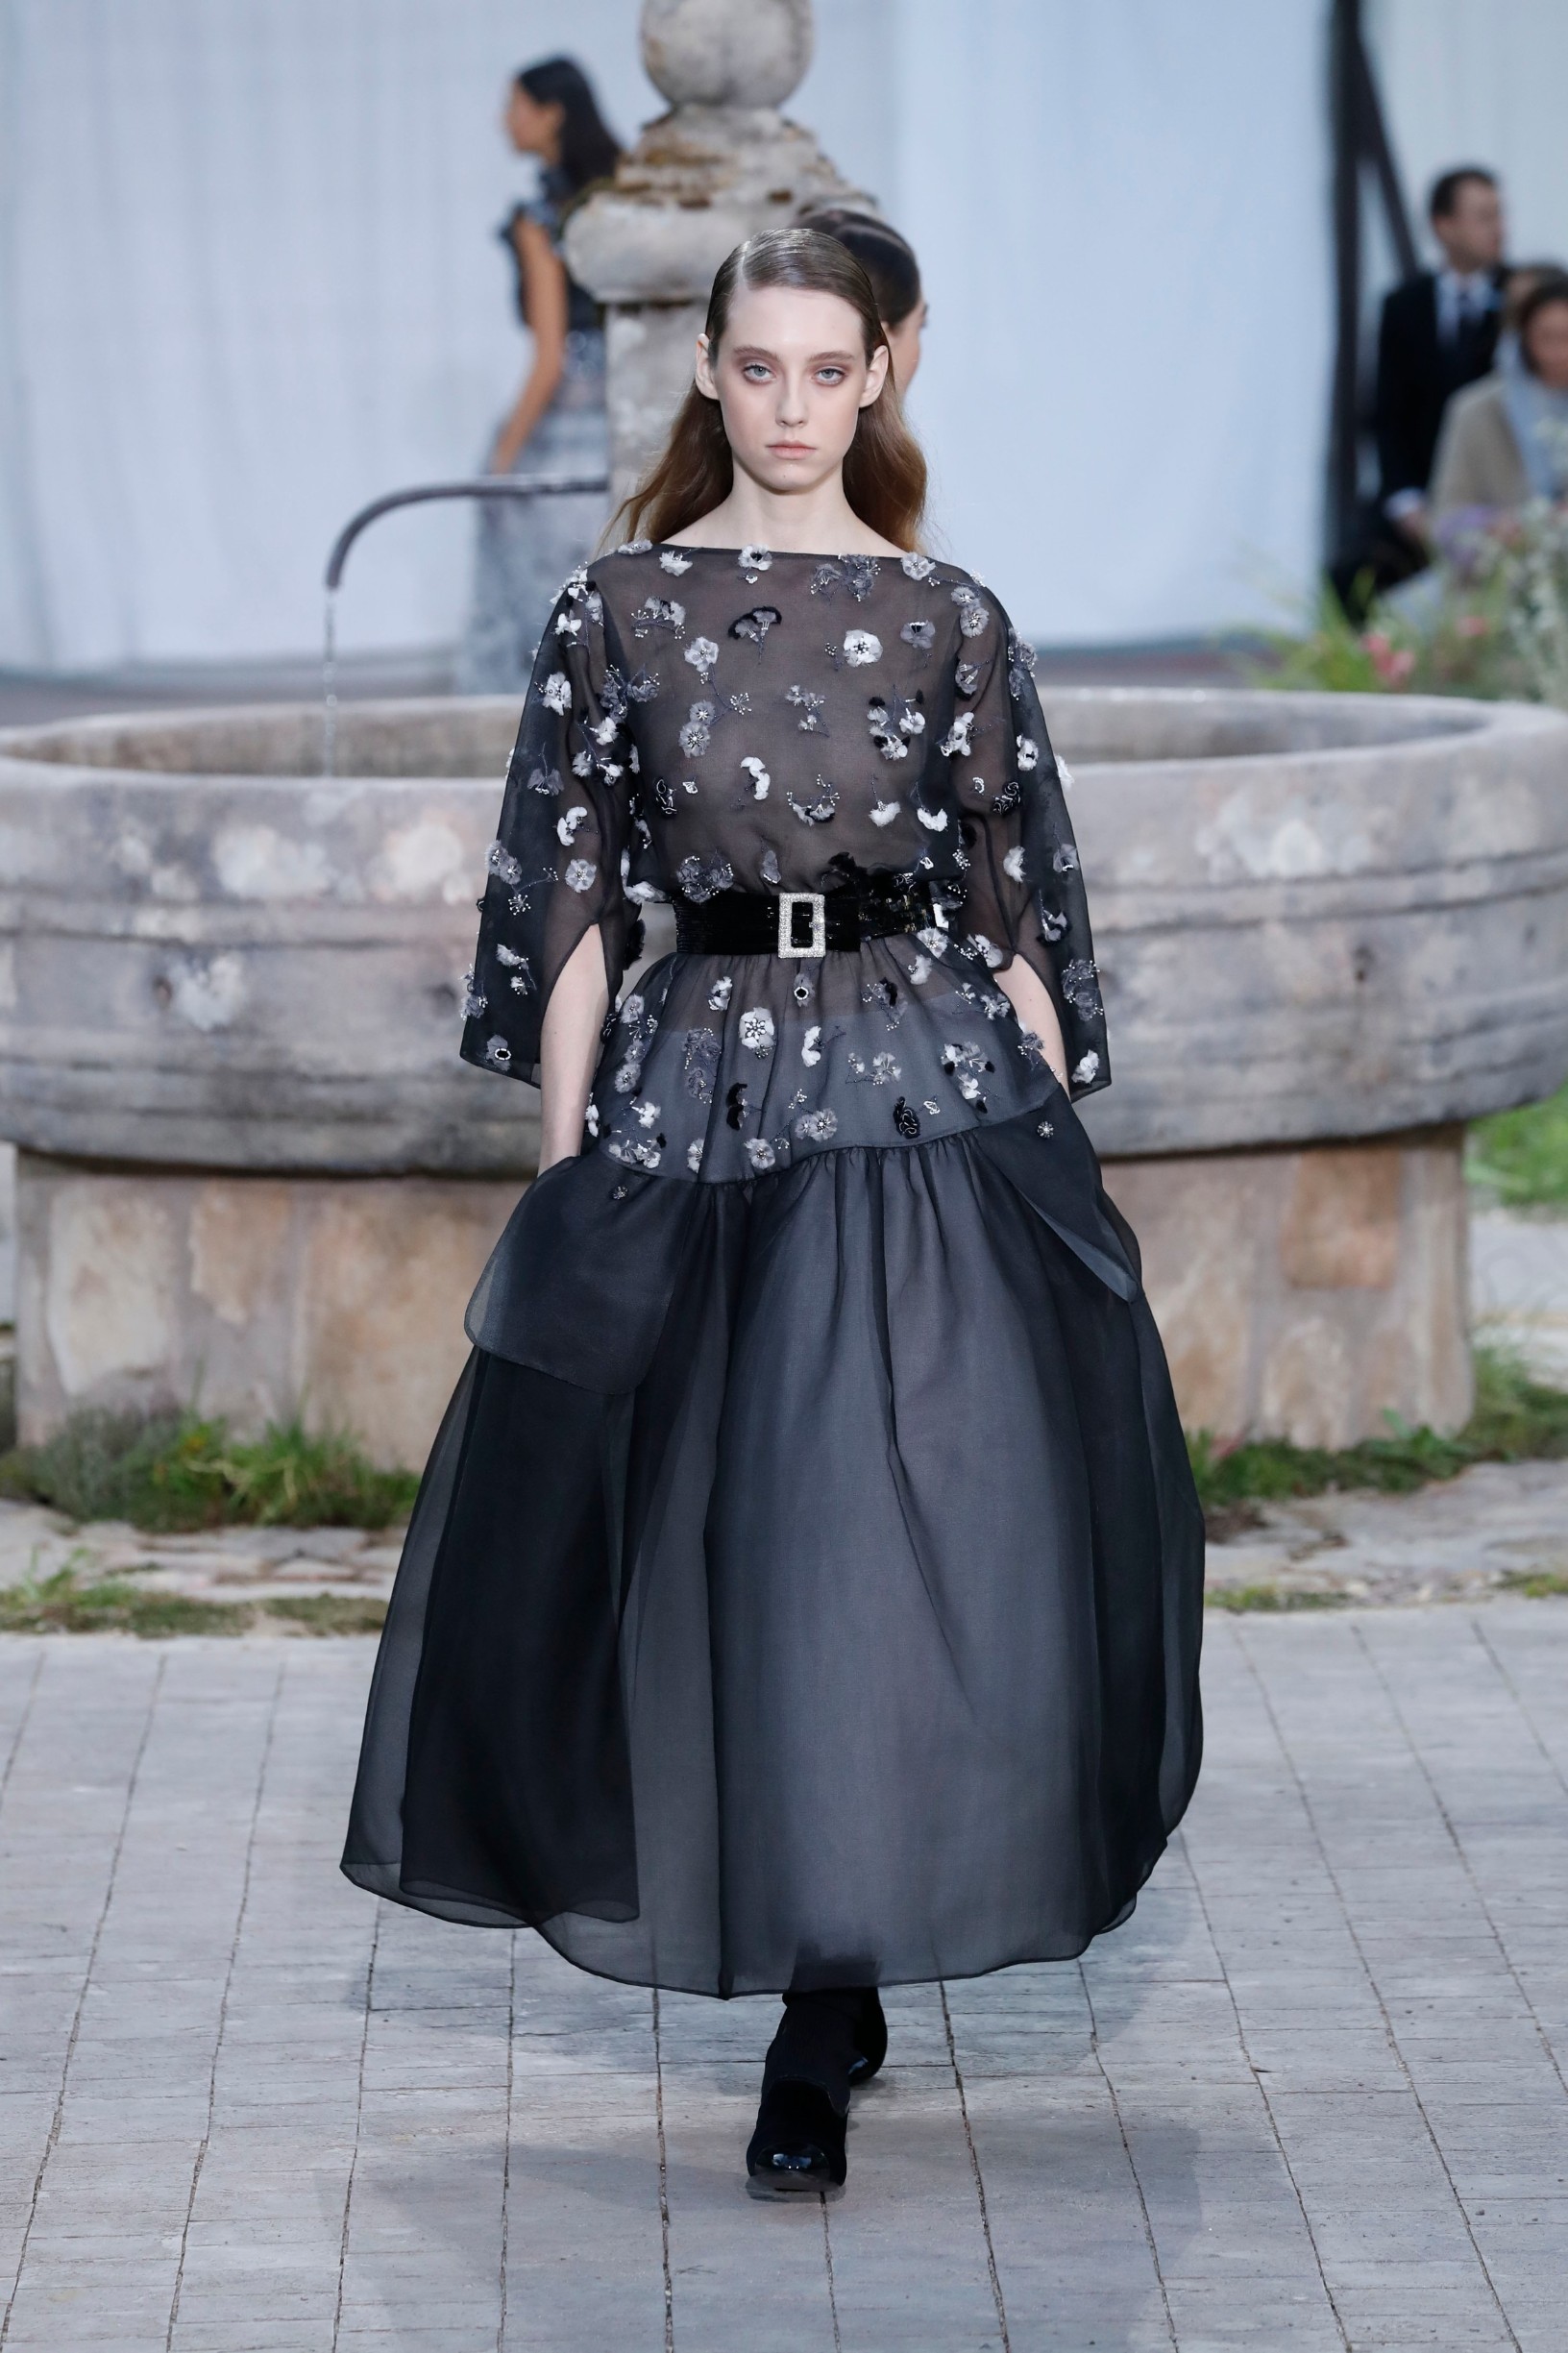 Chanel Spring Summer Haute Couture 2020 catwalk fashion show at Grand Palais in Paris, France in January 2020, Image: 494048405, License: Rights-managed, Restrictions: -, Model Release: no, Credit line: Rick Gold / Capital pictures / Profimedia